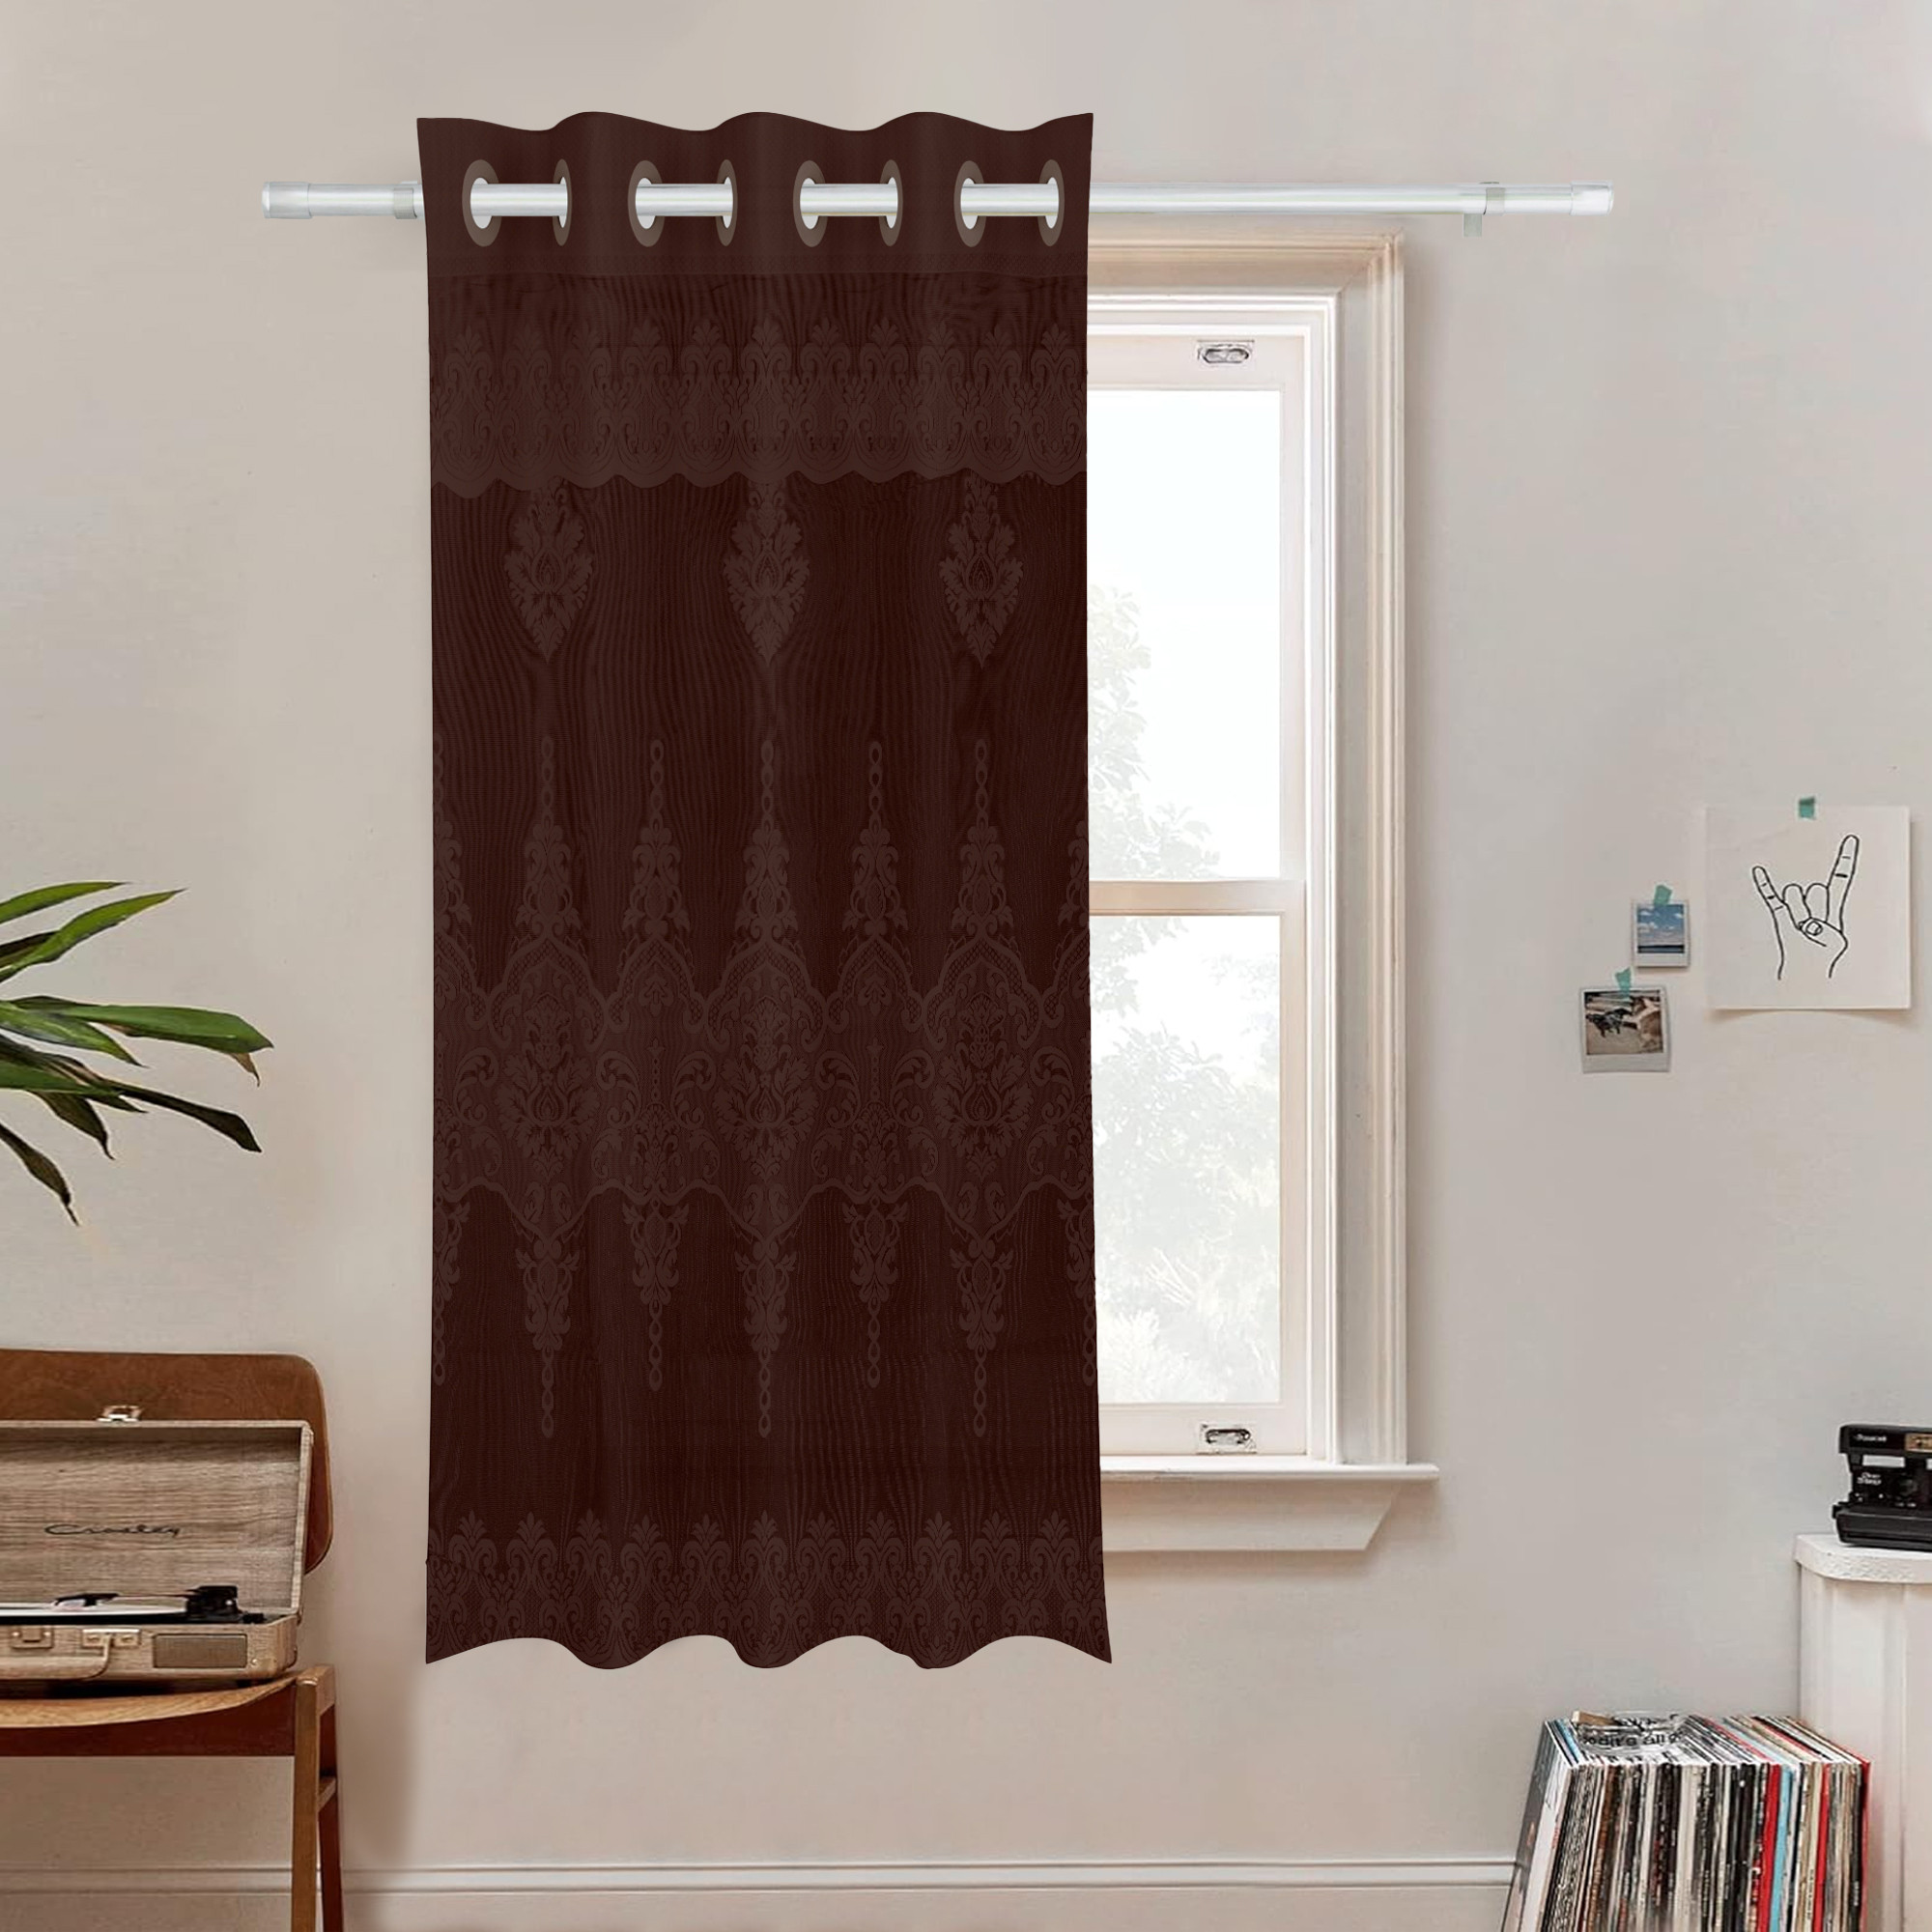 Kuber Industries Window Curtain | Darkening Window Curtains | Sheer Curtain with 8 Rings | Parda for Living Room | Drapes for Bedroom | Net Frill Window Curtain | 5 Ft | SY15ZZ | Brown